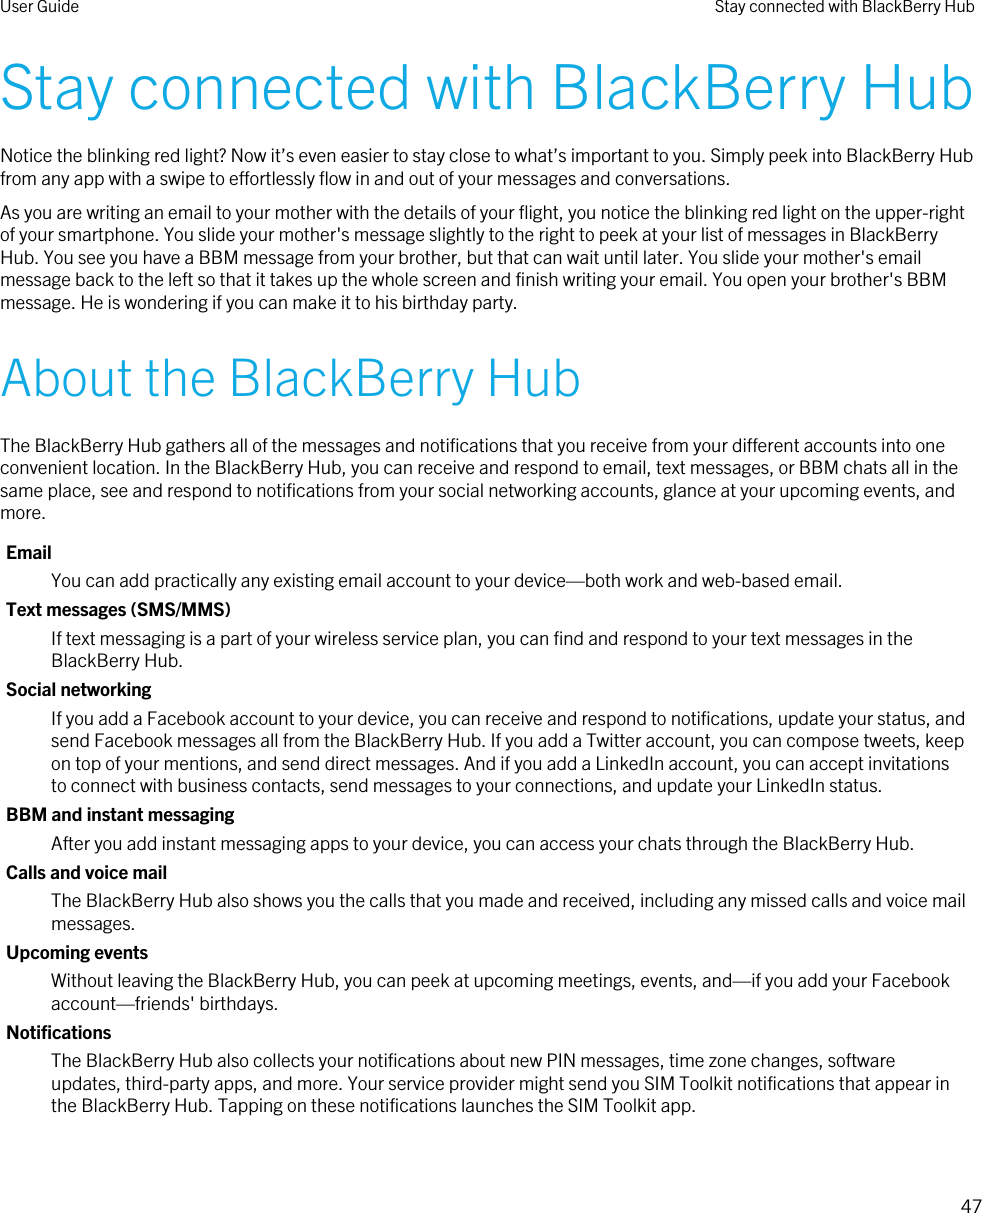 Stay connected with BlackBerry HubNotice the blinking red light? Now it’s even easier to stay close to what’s important to you. Simply peek into BlackBerry Hub from any app with a swipe to effortlessly flow in and out of your messages and conversations.As you are writing an email to your mother with the details of your flight, you notice the blinking red light on the upper-right of your smartphone. You slide your mother&apos;s message slightly to the right to peek at your list of messages in BlackBerry Hub. You see you have a BBM message from your brother, but that can wait until later. You slide your mother&apos;s email message back to the left so that it takes up the whole screen and finish writing your email. You open your brother&apos;s BBM message. He is wondering if you can make it to his birthday party.About the BlackBerry HubThe BlackBerry Hub gathers all of the messages and notifications that you receive from your different accounts into one convenient location. In the BlackBerry Hub, you can receive and respond to email, text messages, or BBM chats all in the same place, see and respond to notifications from your social networking accounts, glance at your upcoming events, and more.EmailYou can add practically any existing email account to your device—both work and web-based email.Text messages (SMS/MMS)If text messaging is a part of your wireless service plan, you can find and respond to your text messages in the BlackBerry Hub.Social networkingIf you add a Facebook account to your device, you can receive and respond to notifications, update your status, and send Facebook messages all from the BlackBerry Hub. If you add a Twitter account, you can compose tweets, keep on top of your mentions, and send direct messages. And if you add a LinkedIn account, you can accept invitations to connect with business contacts, send messages to your connections, and update your LinkedIn status.BBM and instant messagingAfter you add instant messaging apps to your device, you can access your chats through the BlackBerry Hub.Calls and voice mailThe BlackBerry Hub also shows you the calls that you made and received, including any missed calls and voice mail messages.Upcoming eventsWithout leaving the BlackBerry Hub, you can peek at upcoming meetings, events, and—if you add your Facebook account—friends&apos; birthdays.NotificationsThe BlackBerry Hub also collects your notifications about new PIN messages, time zone changes, software updates, third-party apps, and more. Your service provider might send you SIM Toolkit notifications that appear in the BlackBerry Hub. Tapping on these notifications launches the SIM Toolkit app.User Guide Stay connected with BlackBerry Hub47 